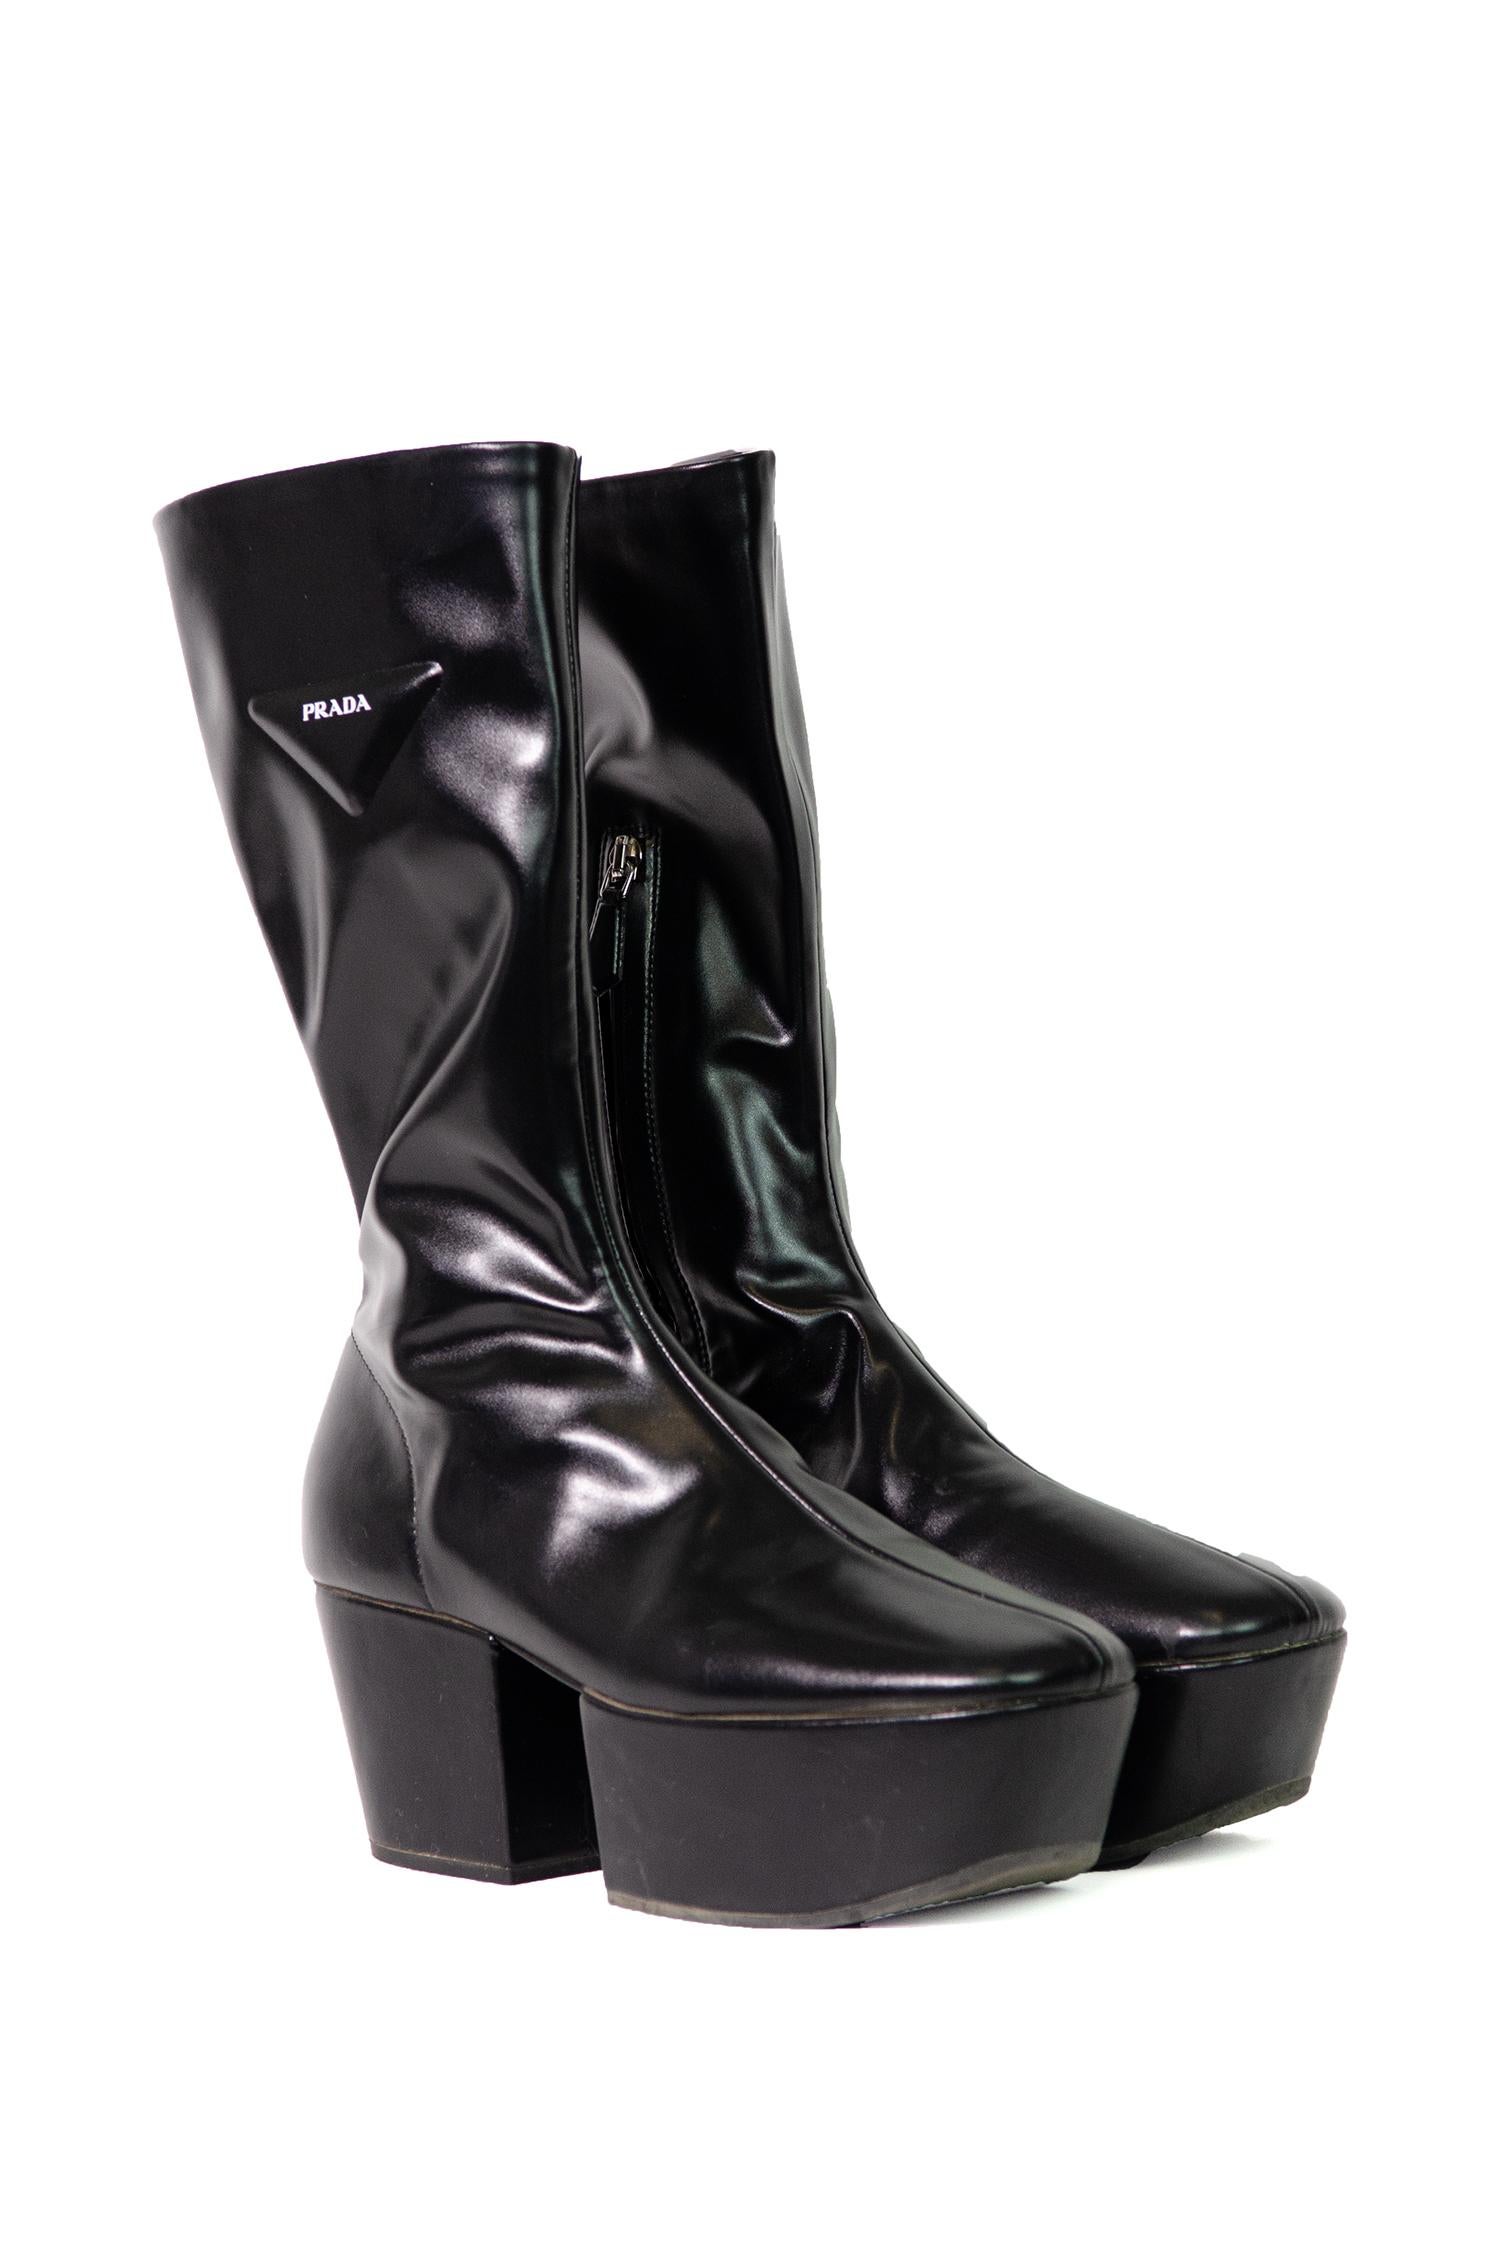 Incredible platform boots from the third collection co-designed by Miuccia Prada and Raf Simmons. This Prada Fall Winter 2021 collection was inspired by the idea of change and transformation.

These sleek ankle length boots are made from a shiny